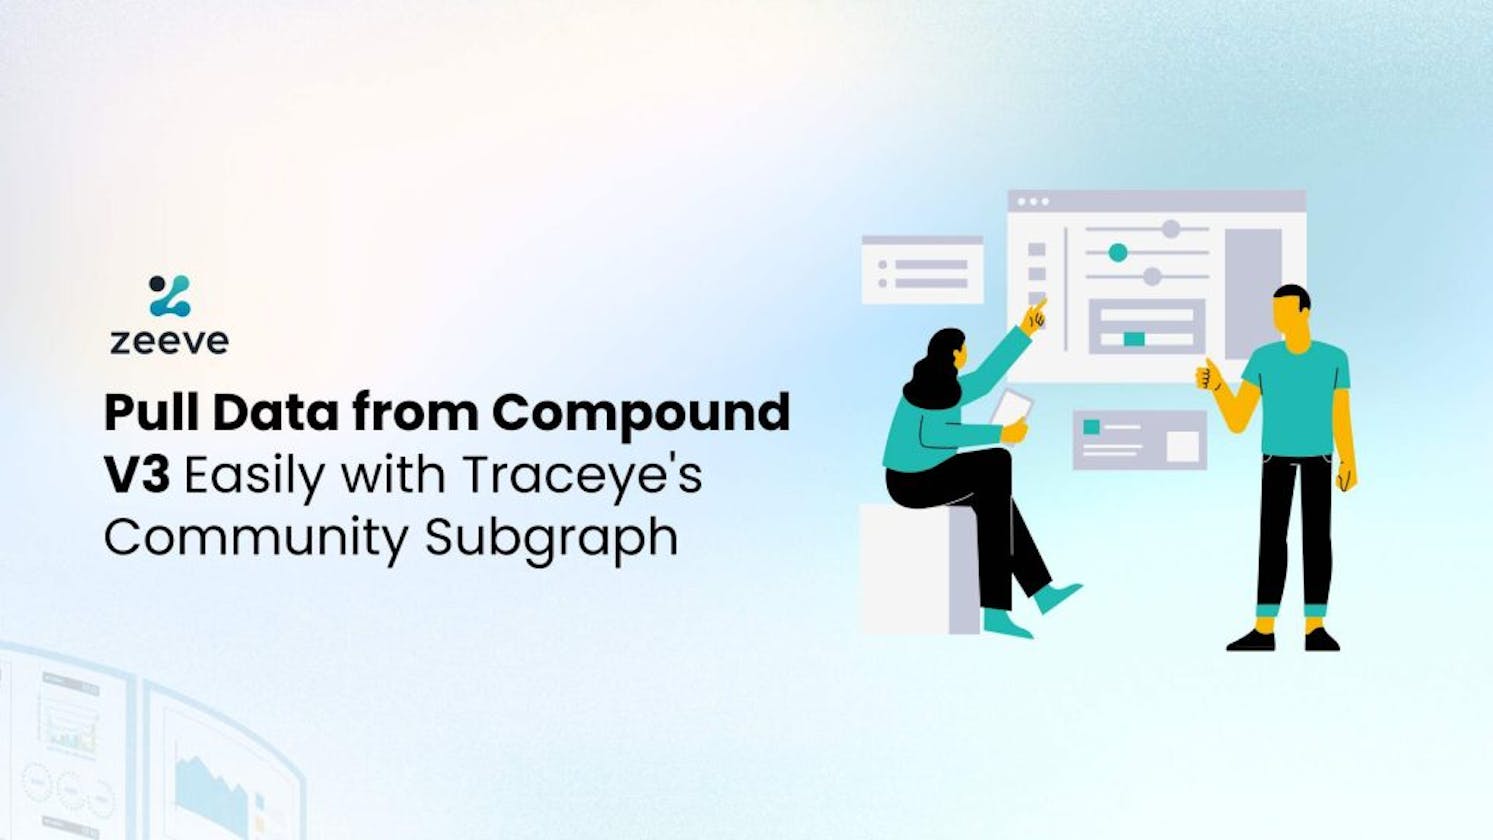 Pull Data from Compound V3 Easily with Traceye’s Community Subgraph